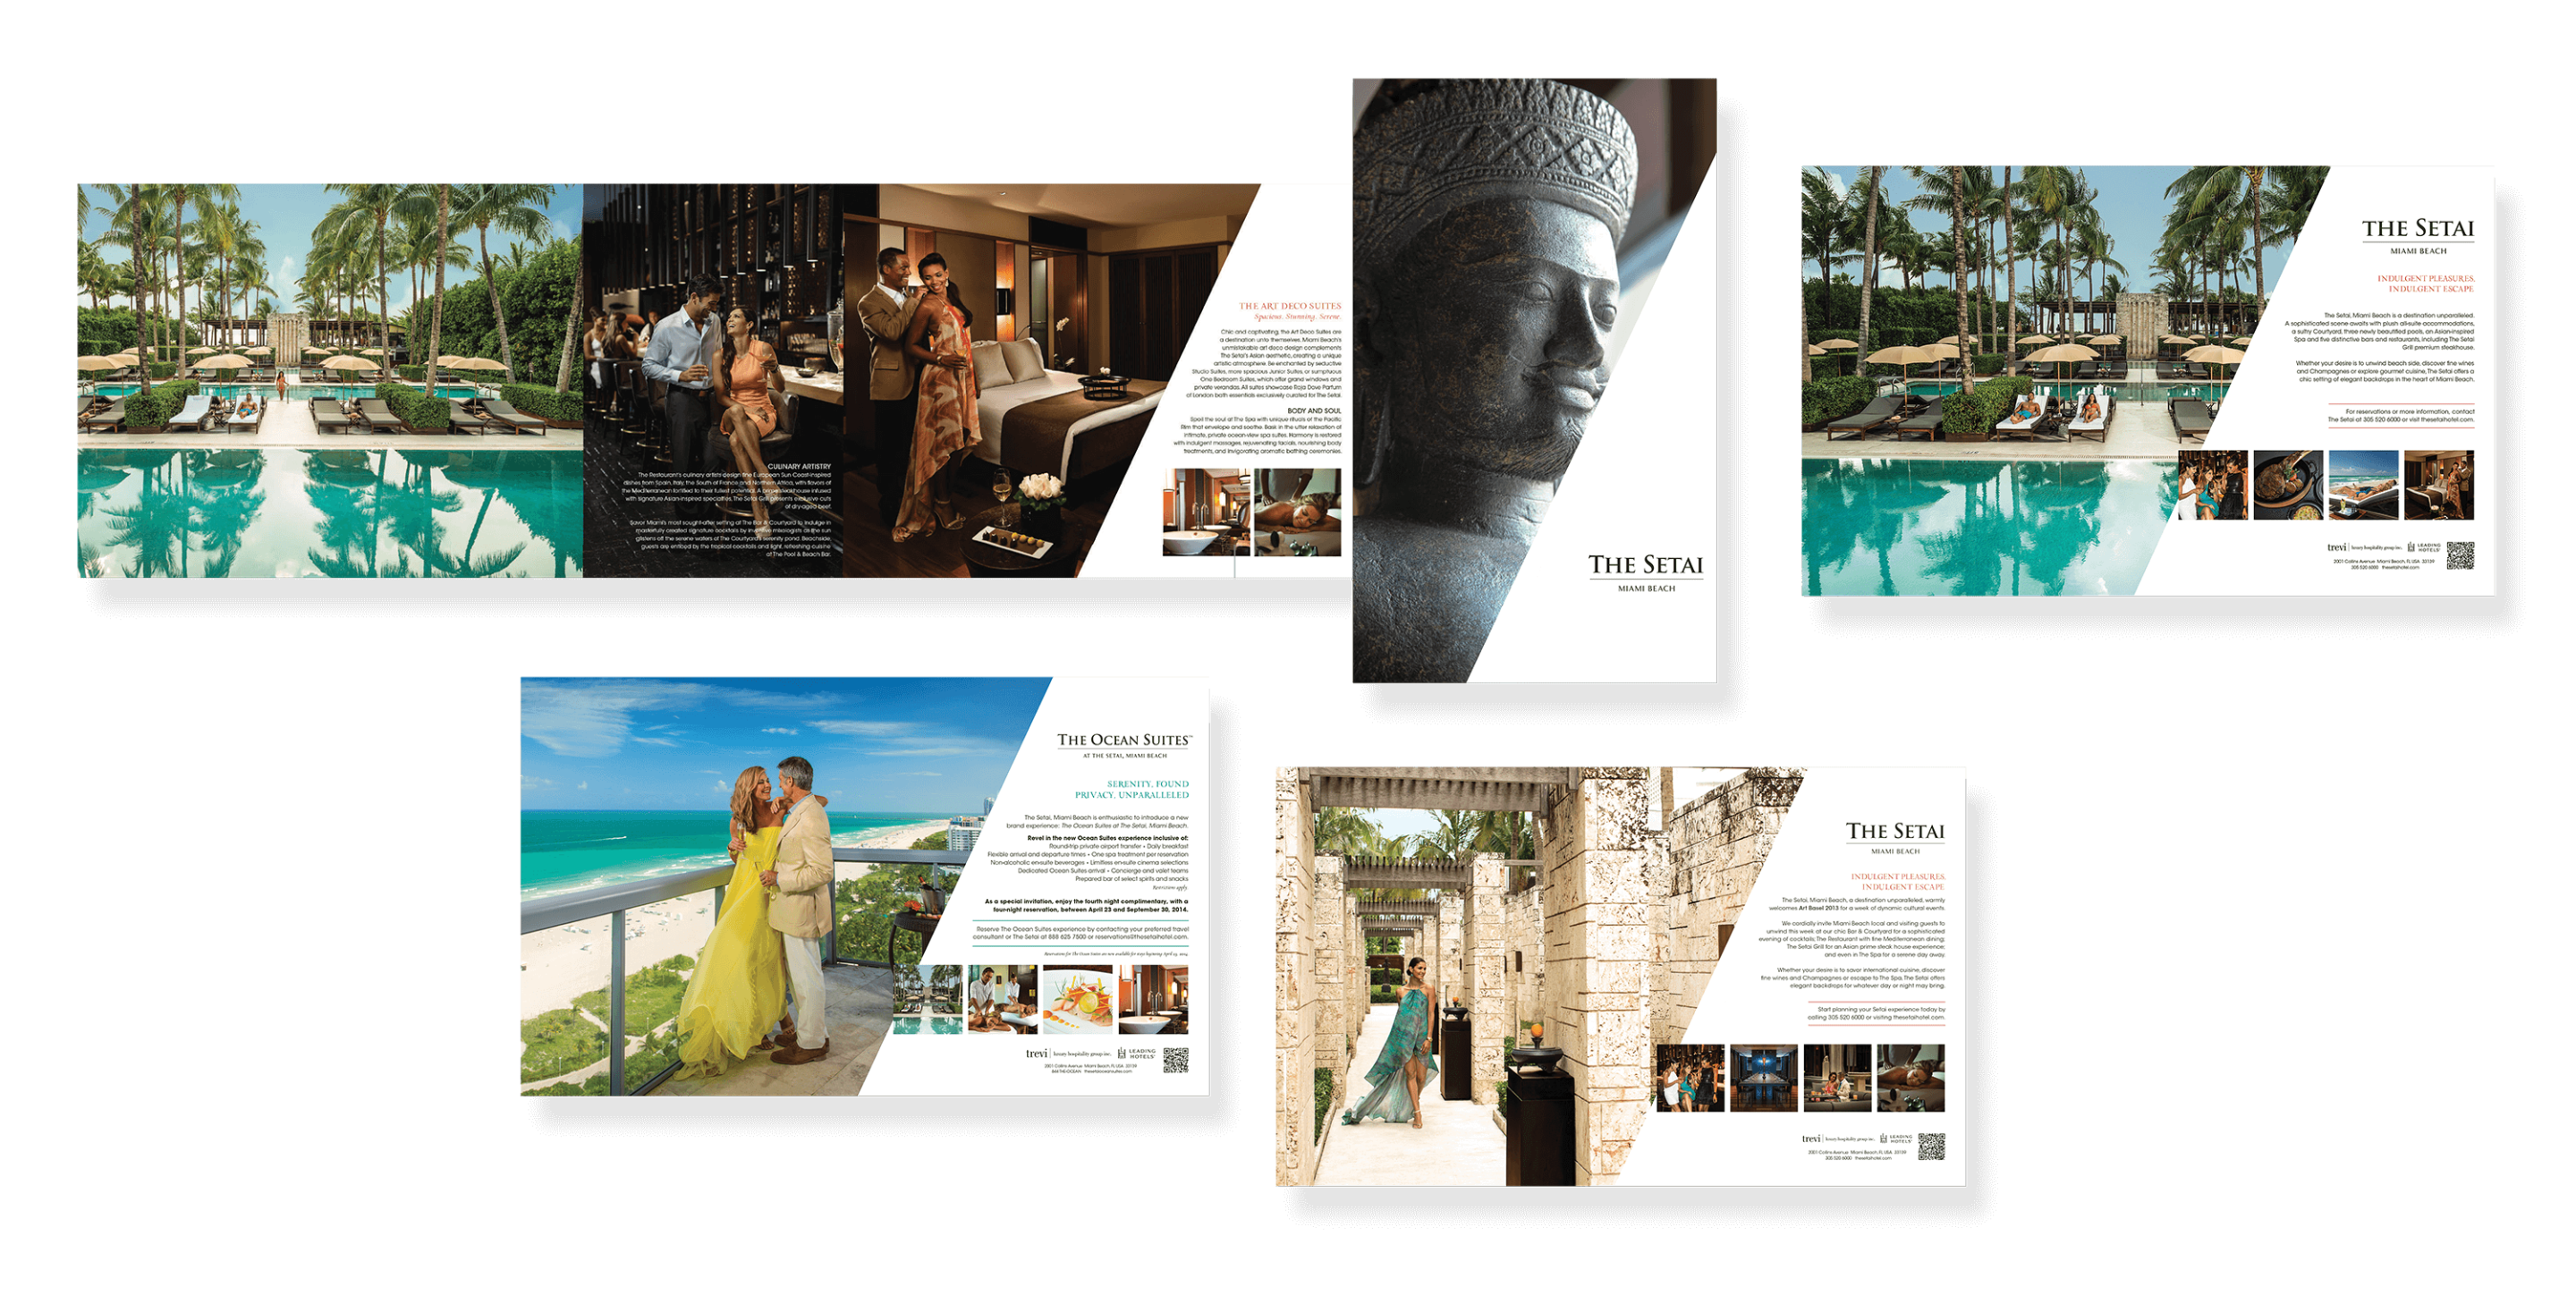 Branding package for The Setai - Miami luxury hotel